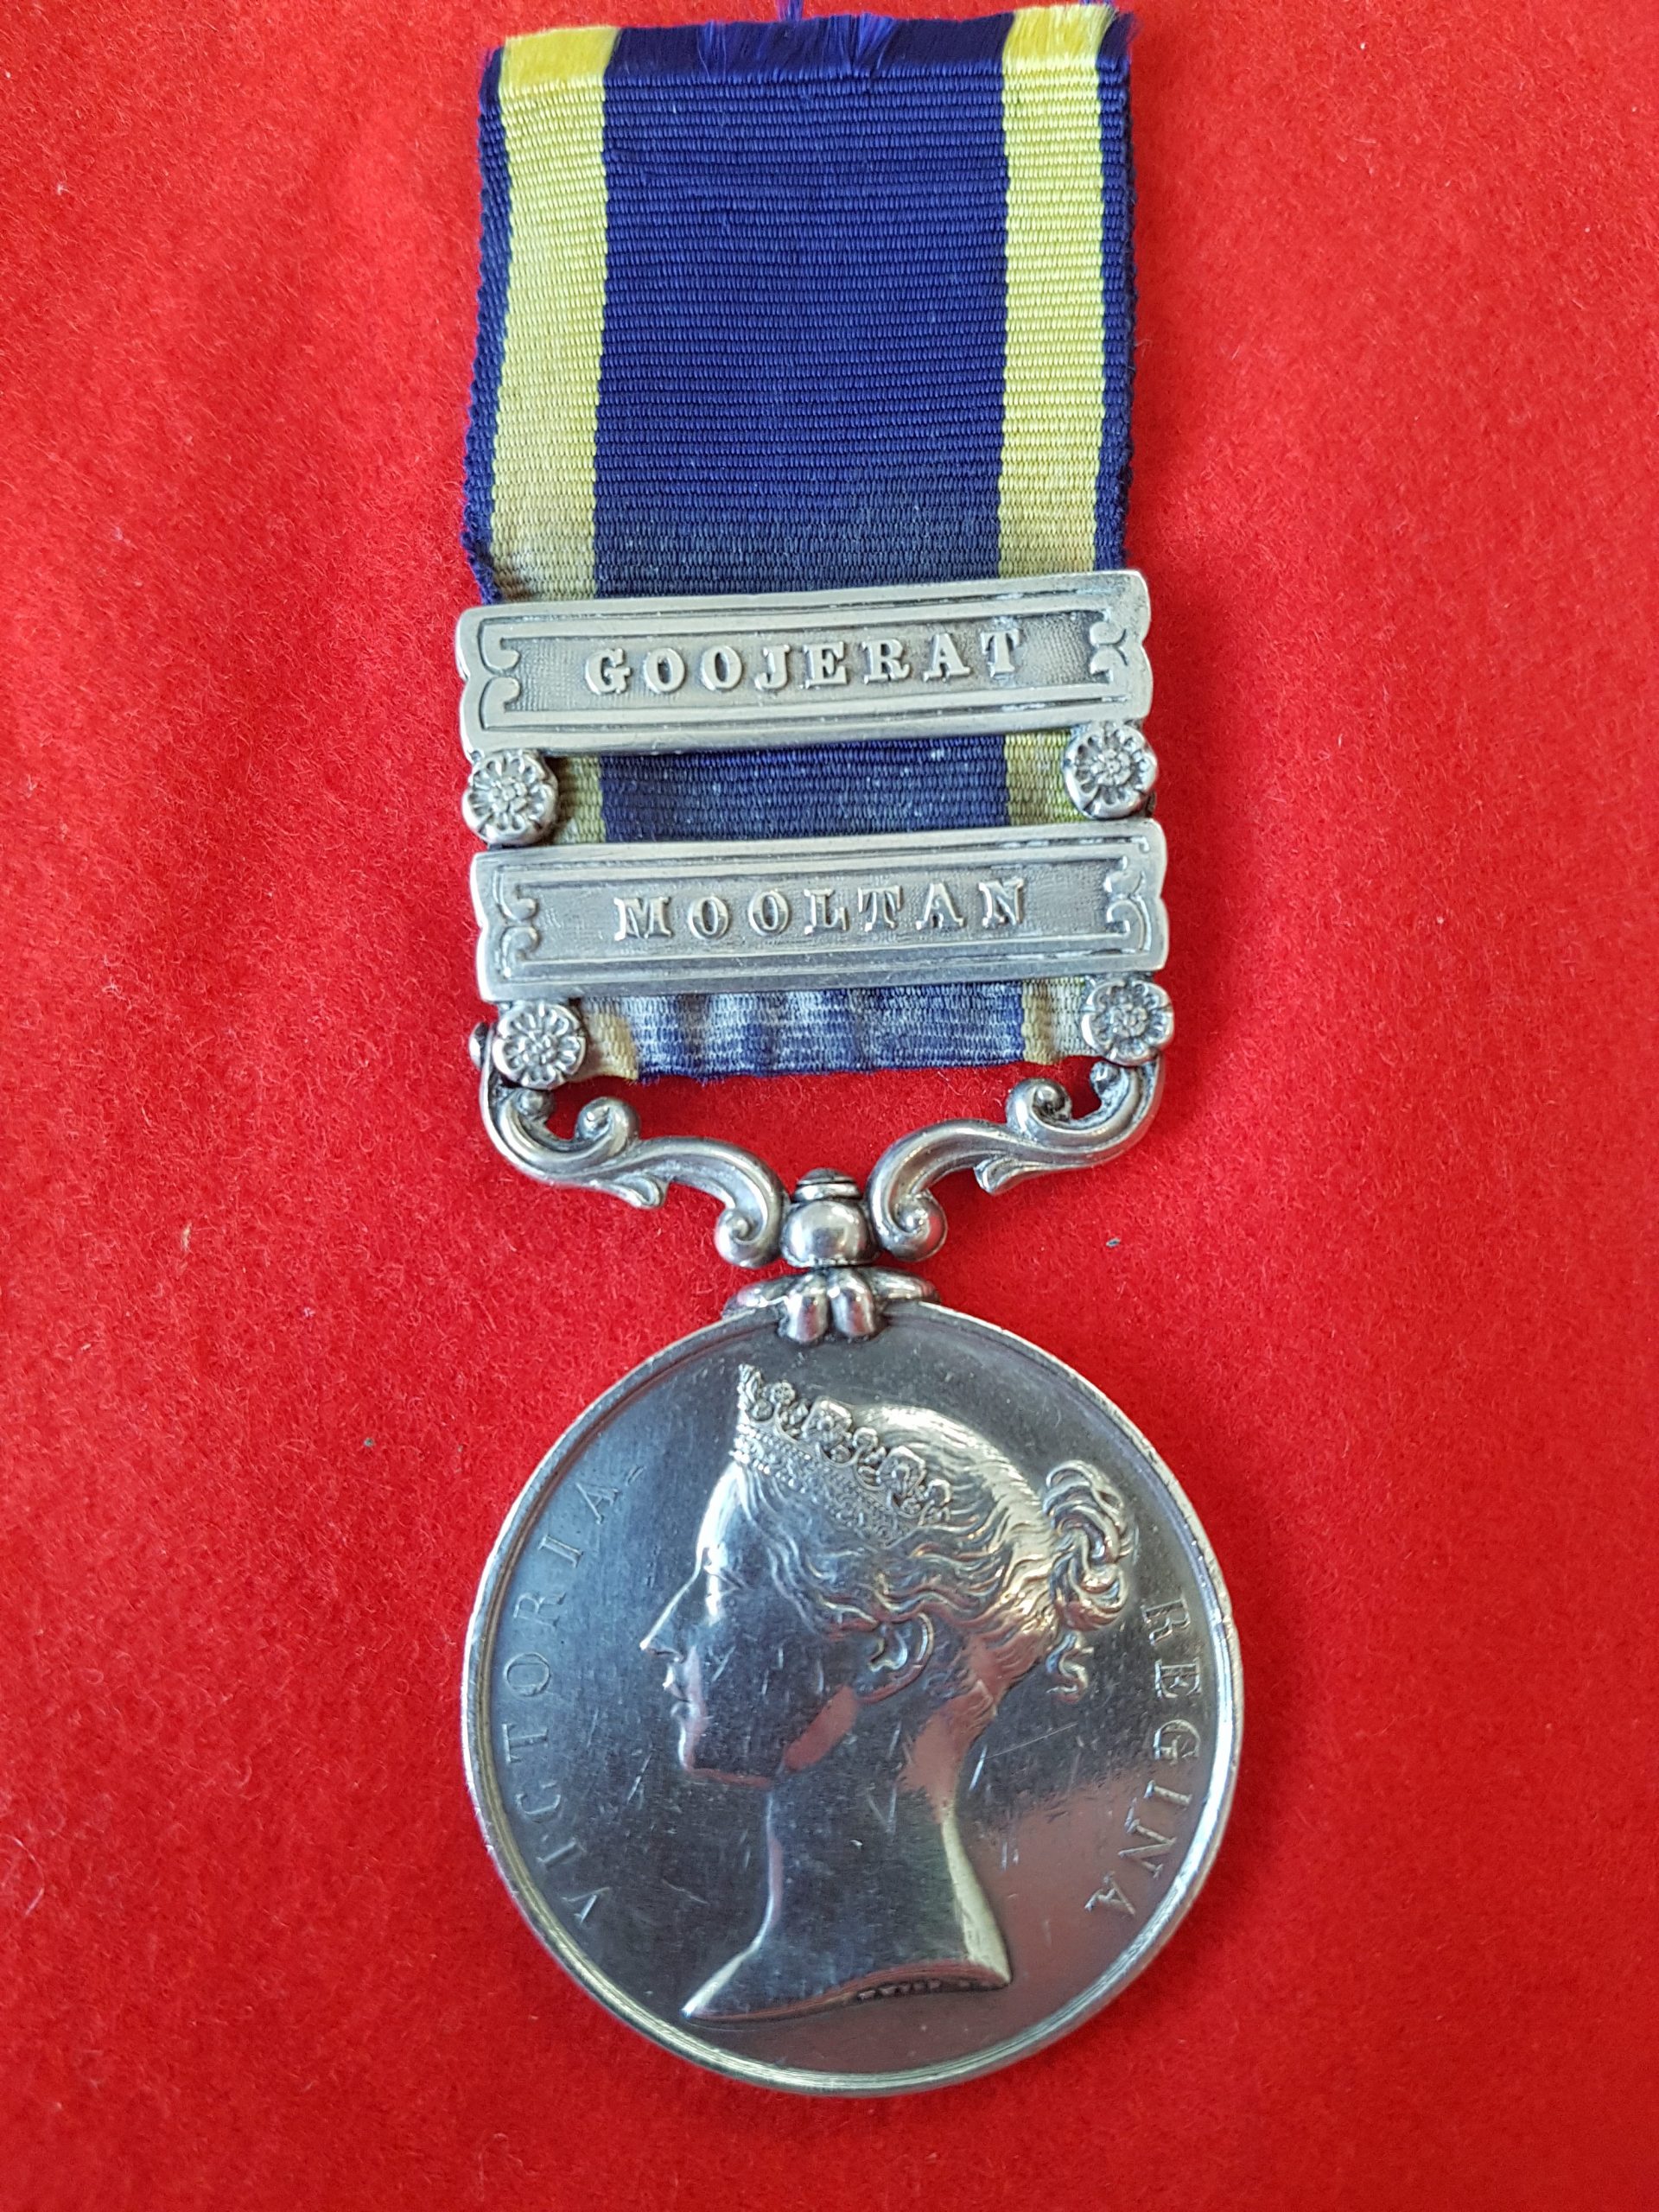 Punjab Medal 1849 with Goojerat and Mooltan clasps medalbuyers.com